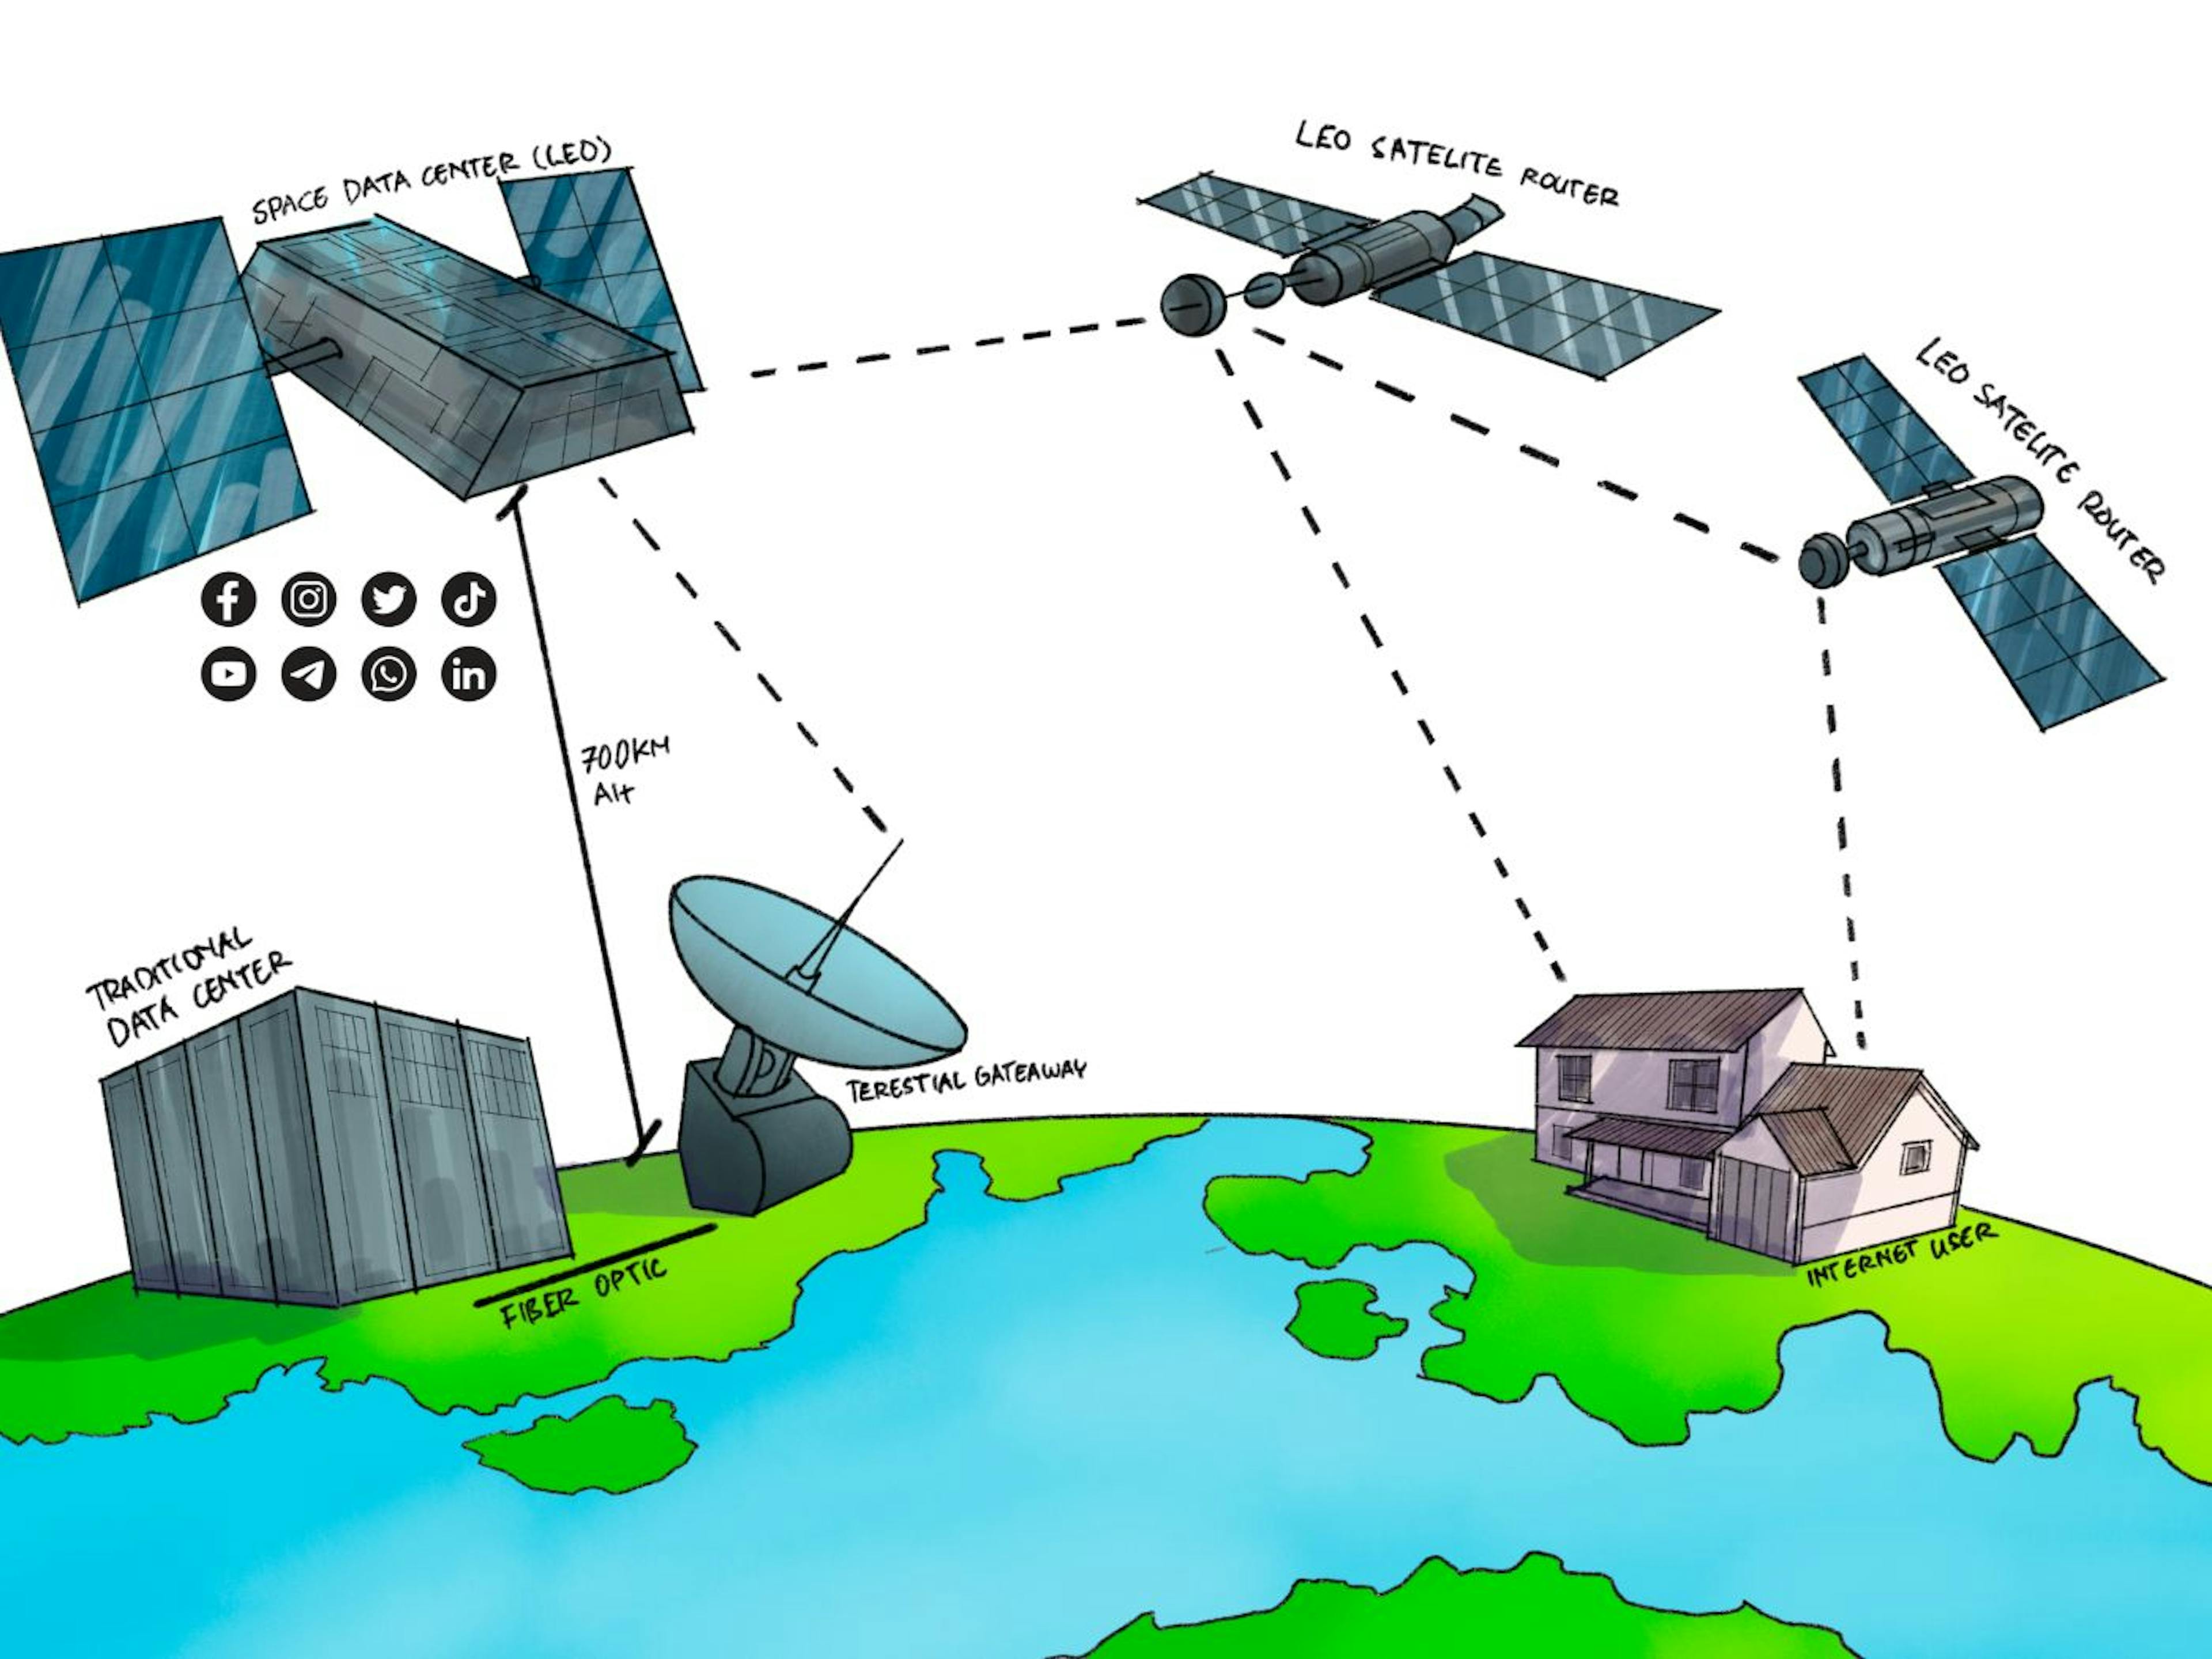 General proposed Design for Data Centers in Space.